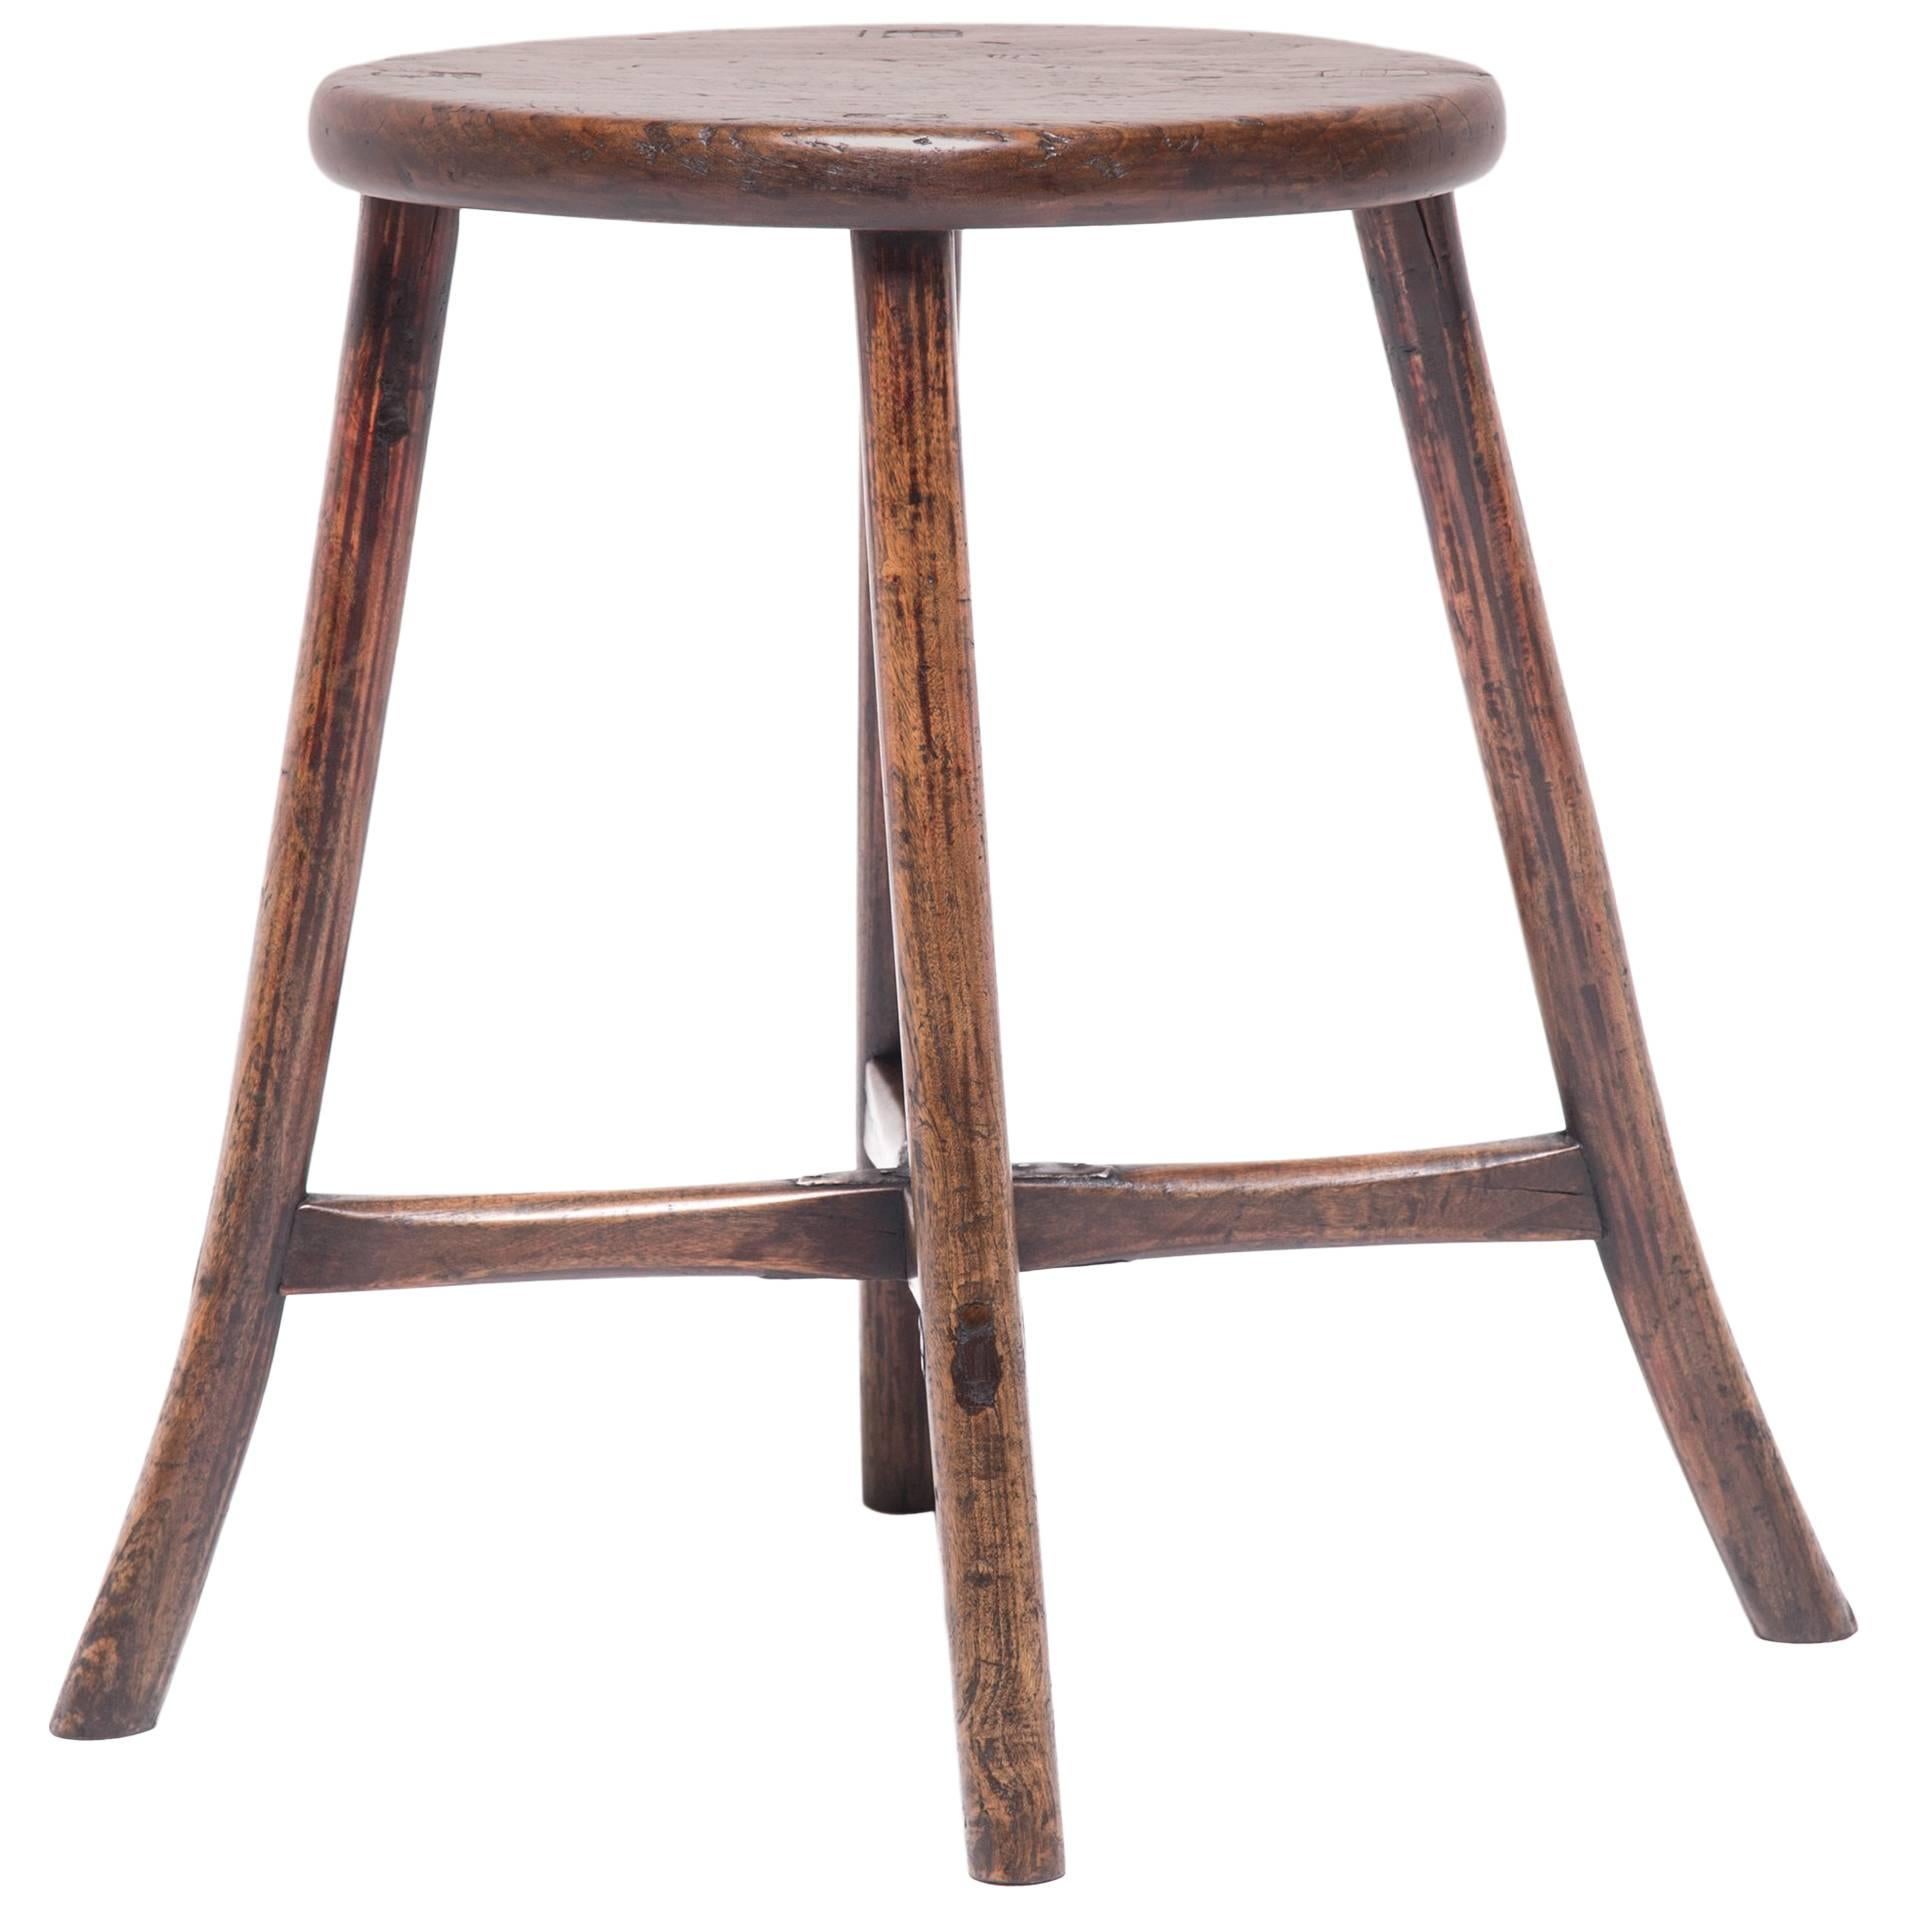 Chinese Provincial Oval Stool with Flared Legs